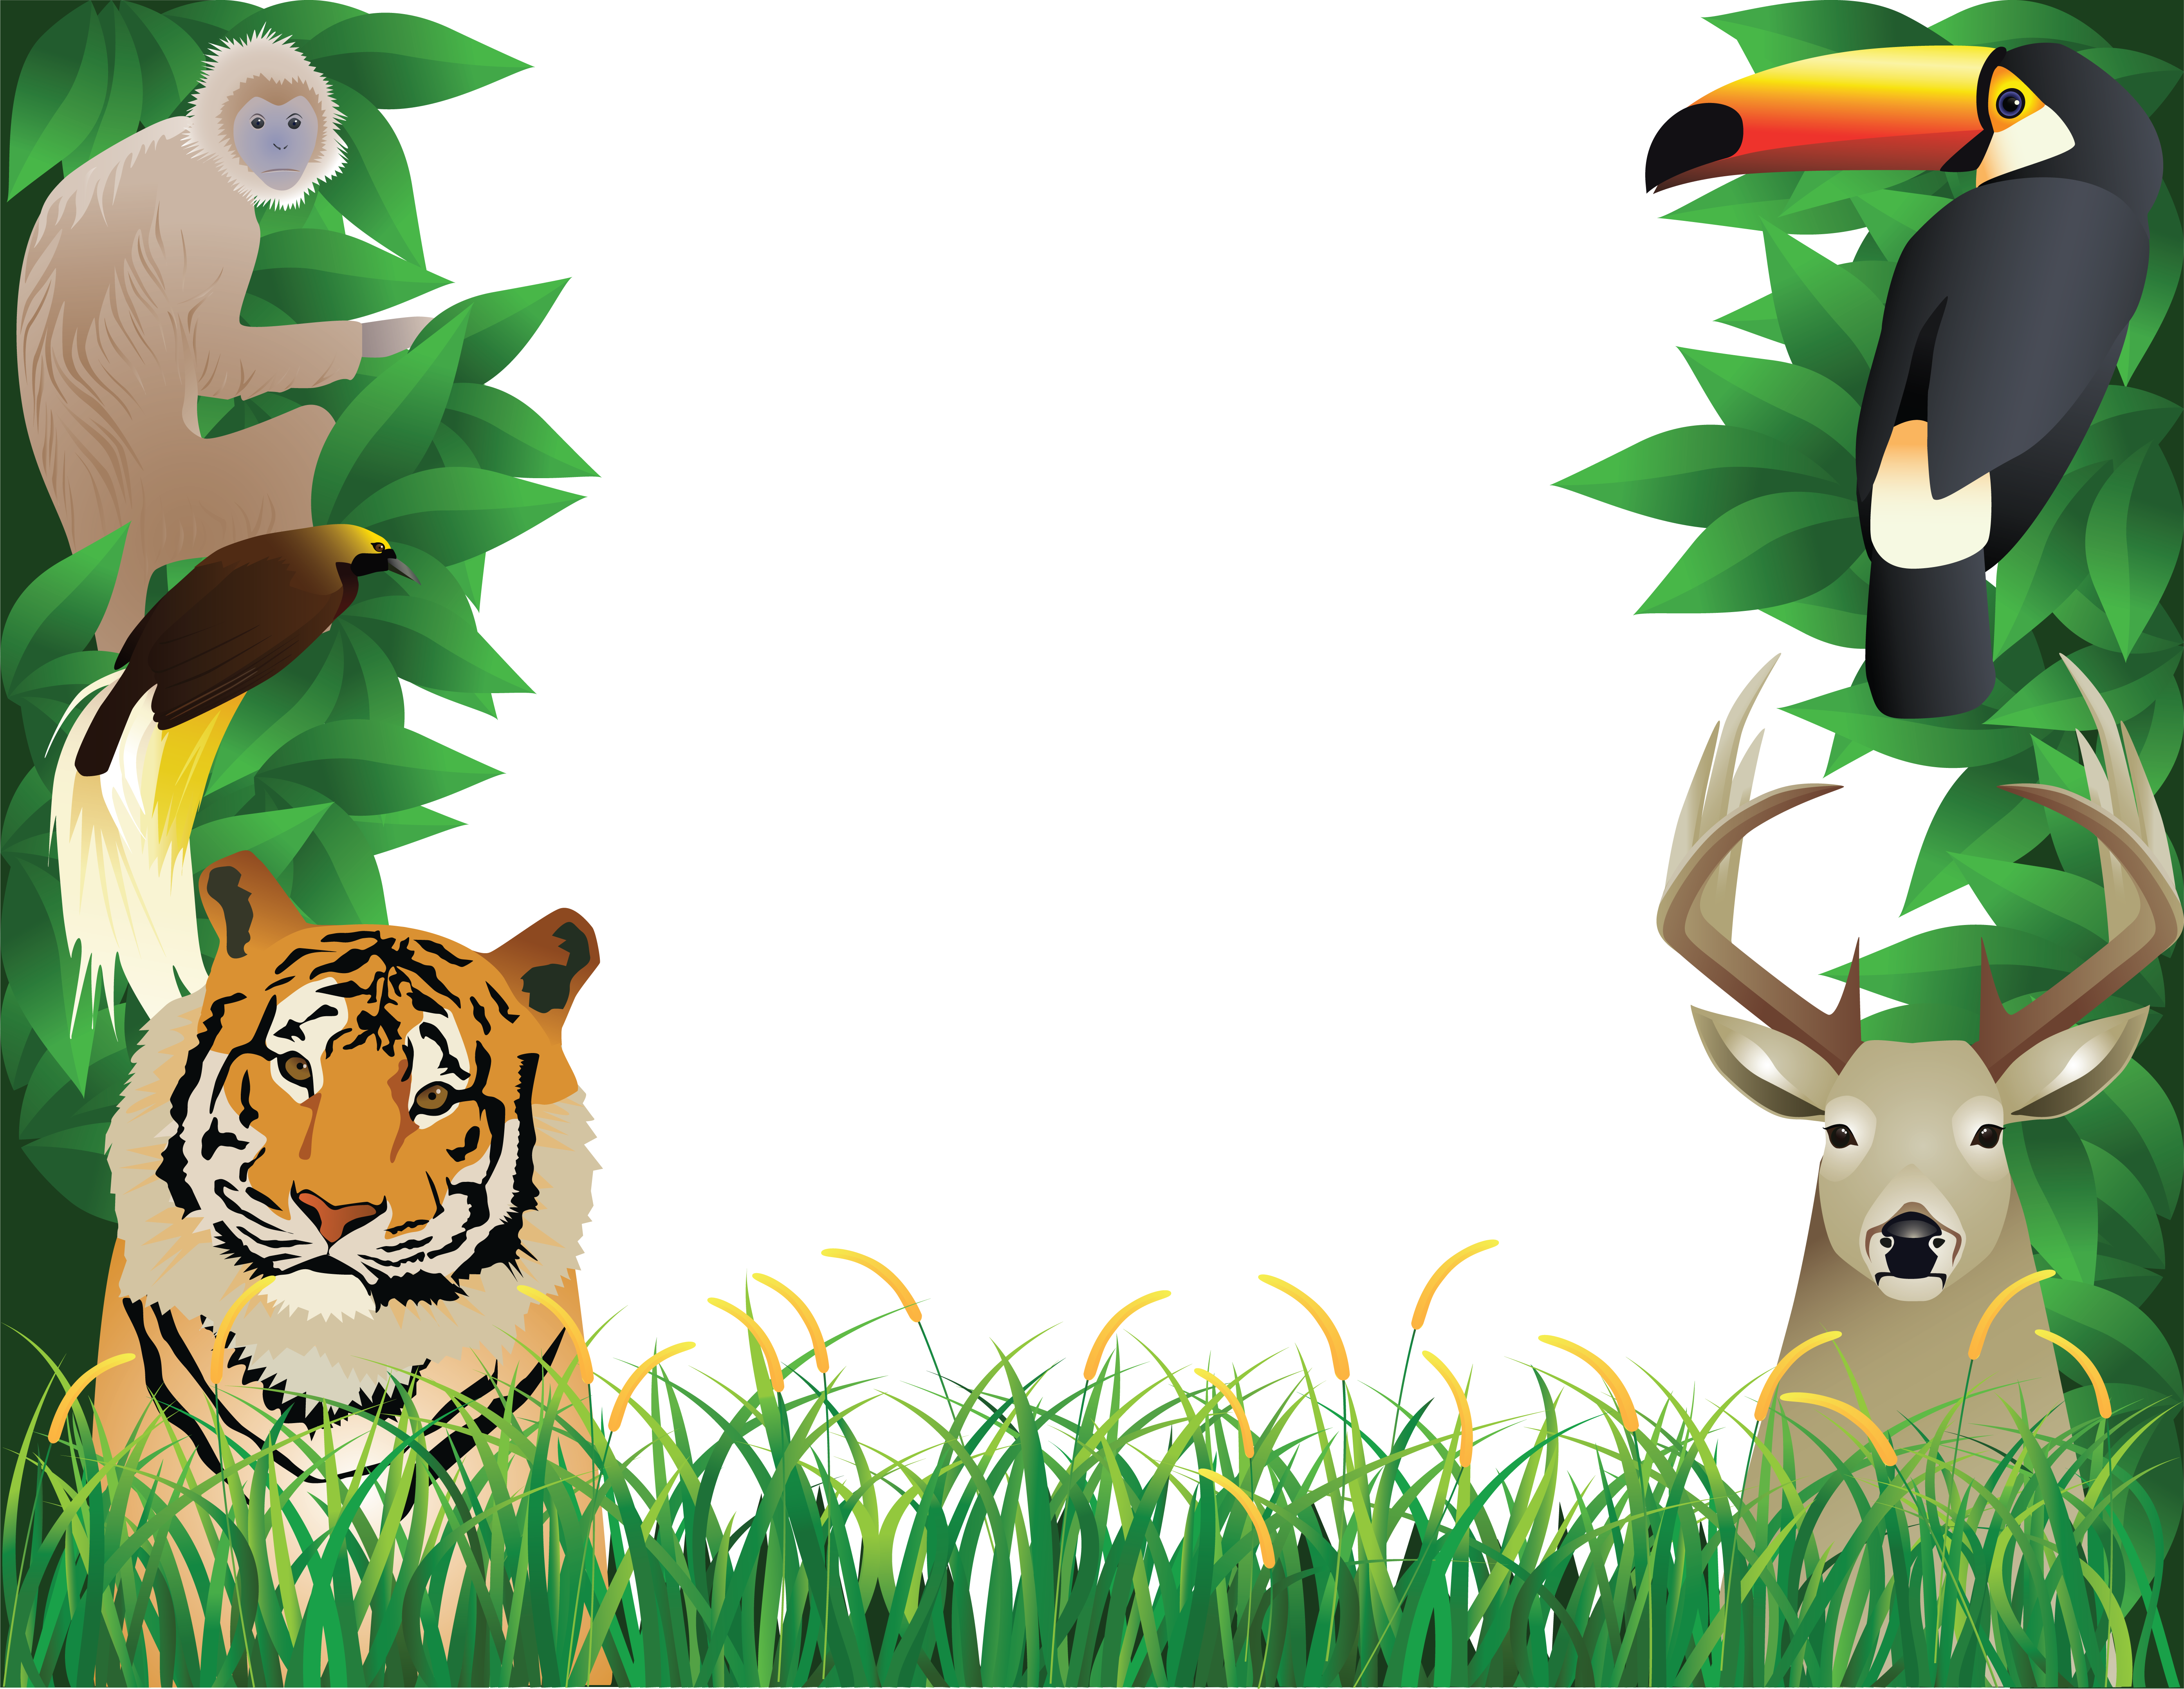 Background Images Jungle Animals - Happy jungle animals creating a